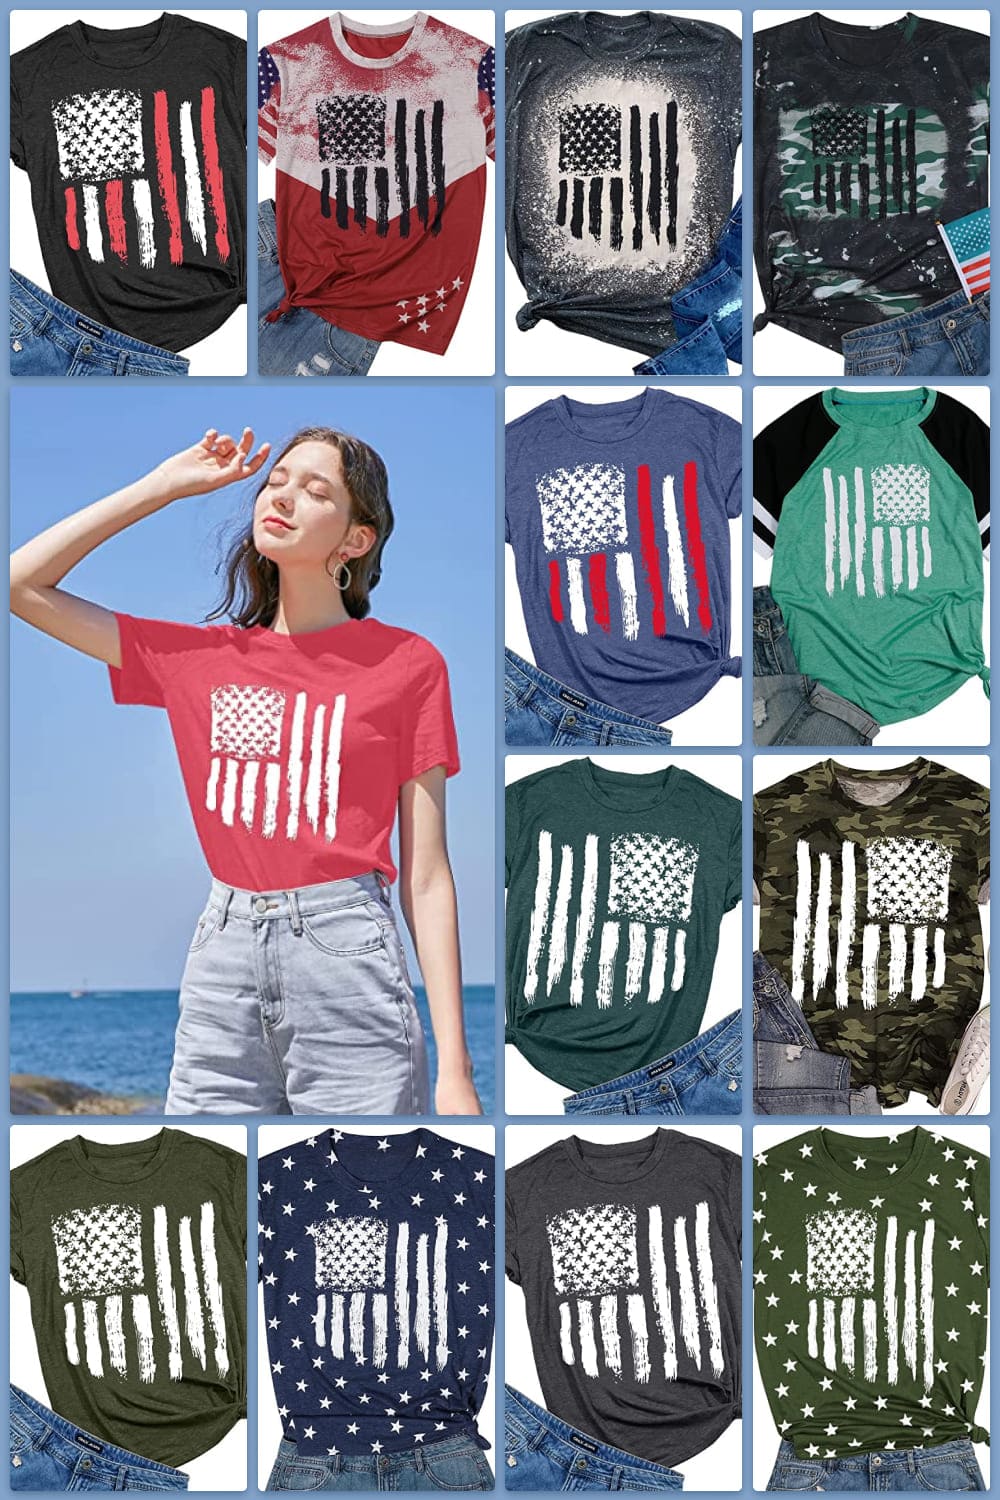 Collage of colorful t-shirts with a stylized flag.